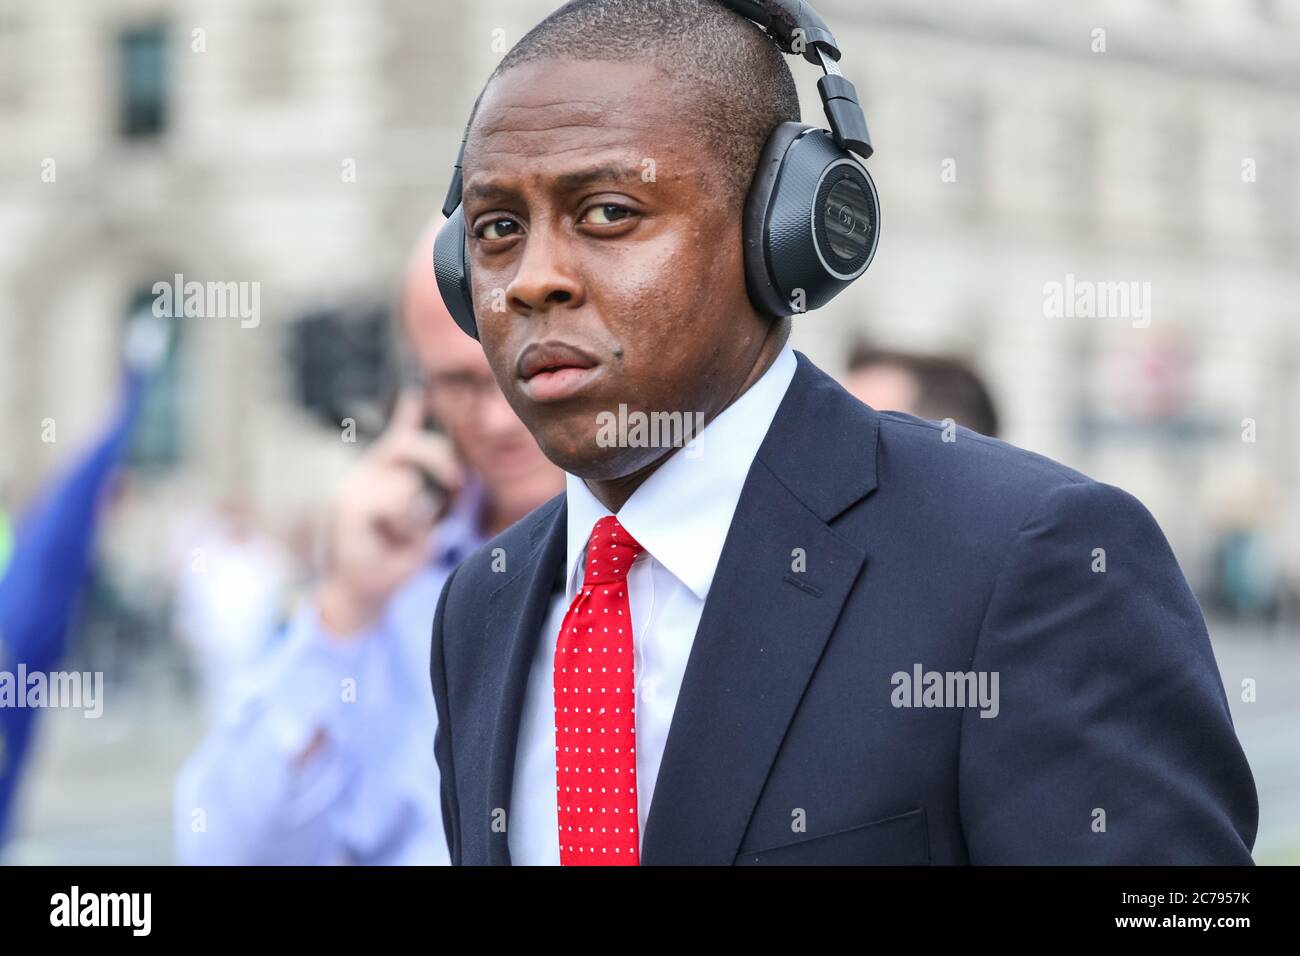 Westminster, London, UK. 15th July, 2020. Conservative MP Bim Afolami walks through the crowd but does not interact. Pro European Anti Brexit protesters and campaigners around Steve (Steven) Bay hold their weekly protest outside the gates at the Houses of Parliament and in Parliament Square, Westminster as MP's hold PMQs inside the House of Commons. Credit: Imageplotter/Alamy Live News Stock Photo